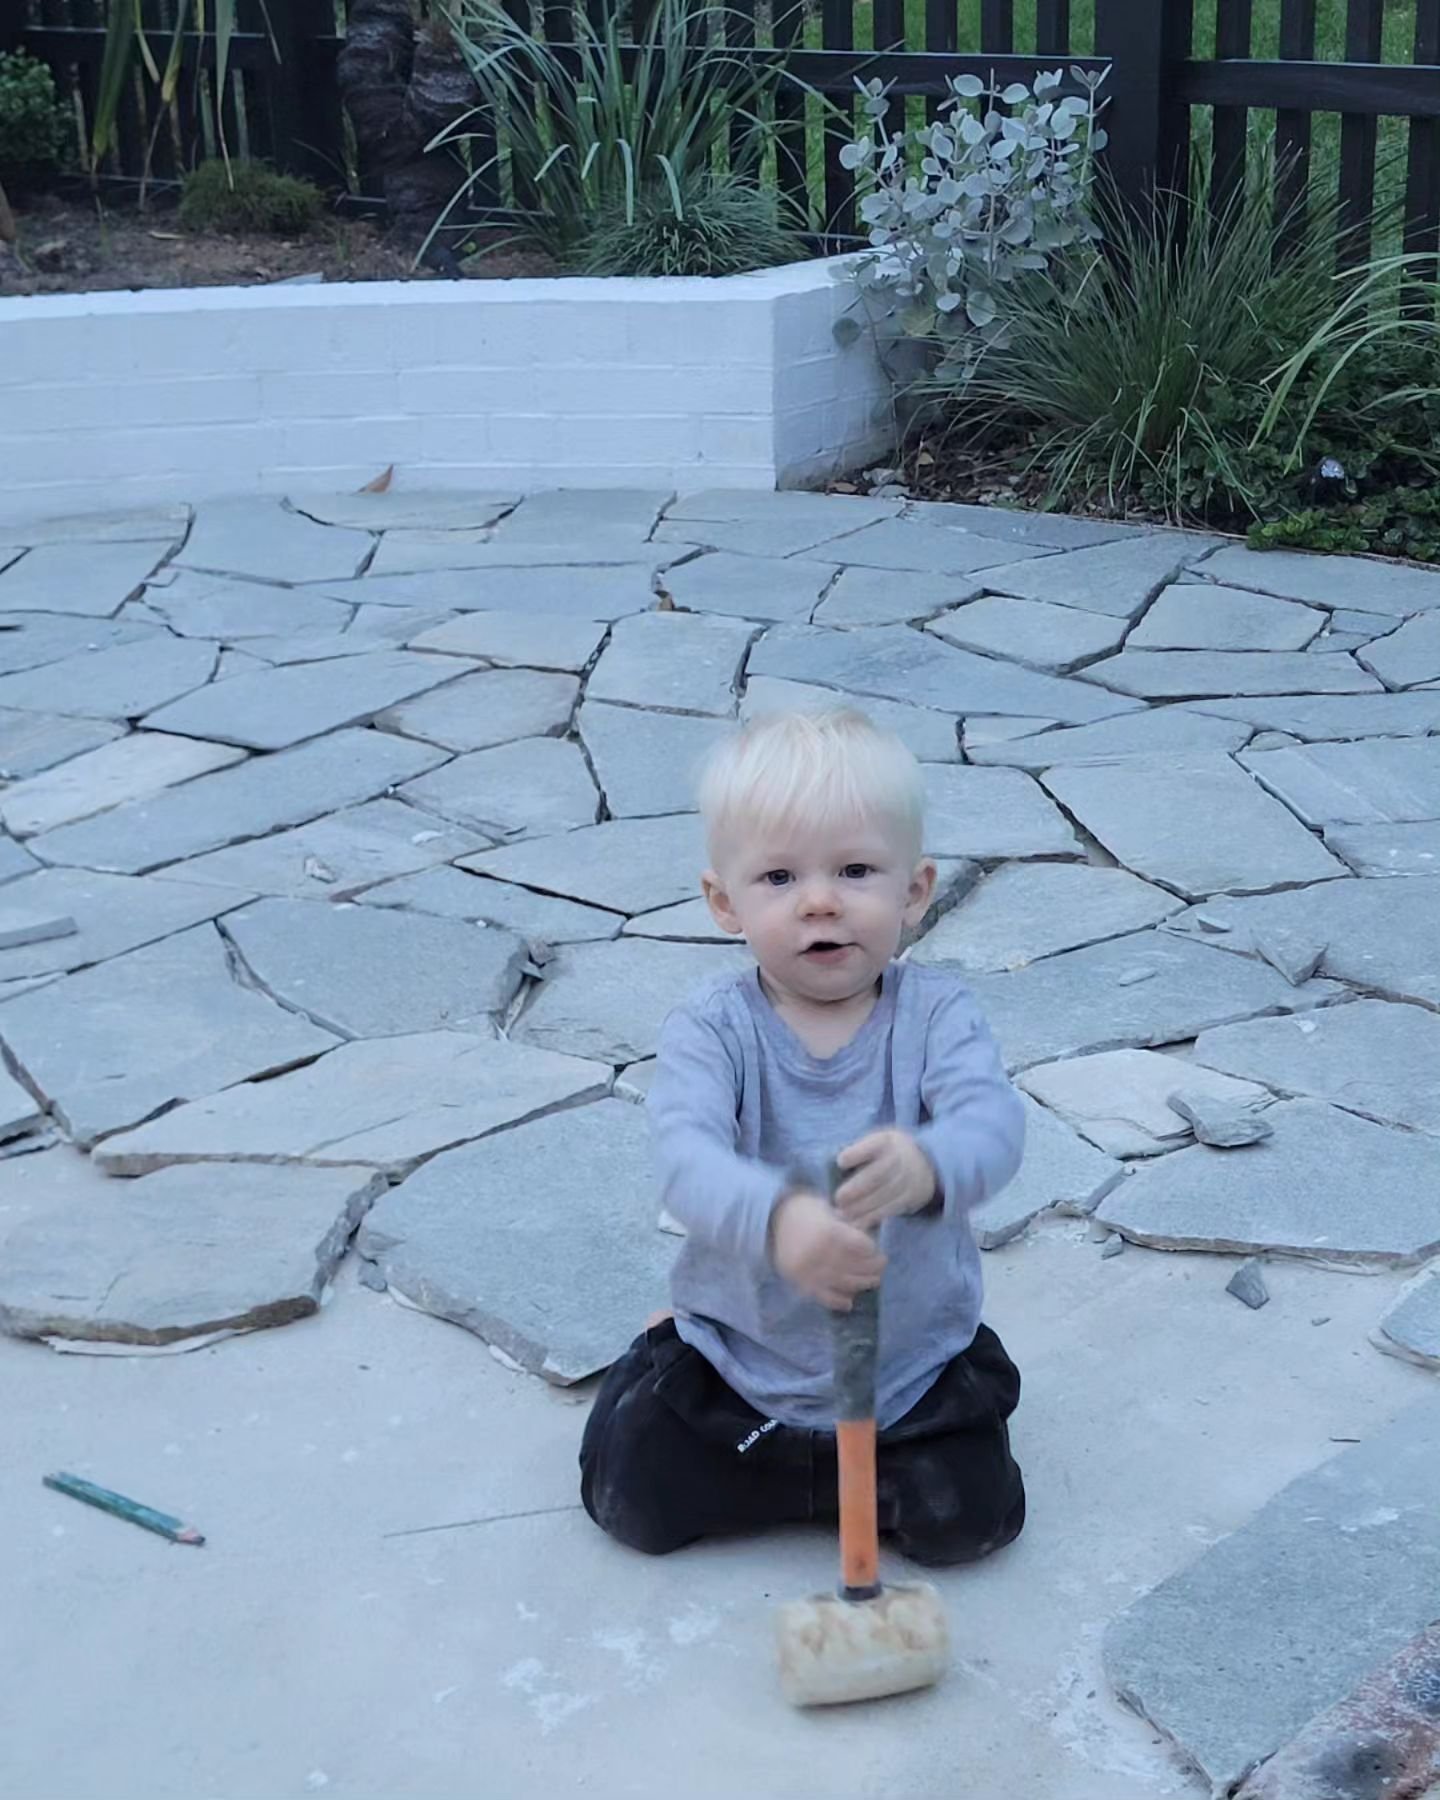 The new apprentice has smashed it out today. Just wait till he can walk ⚒️🪨

#stonework #crazypaving #stonemason #landscapedesign #frontyard #garden